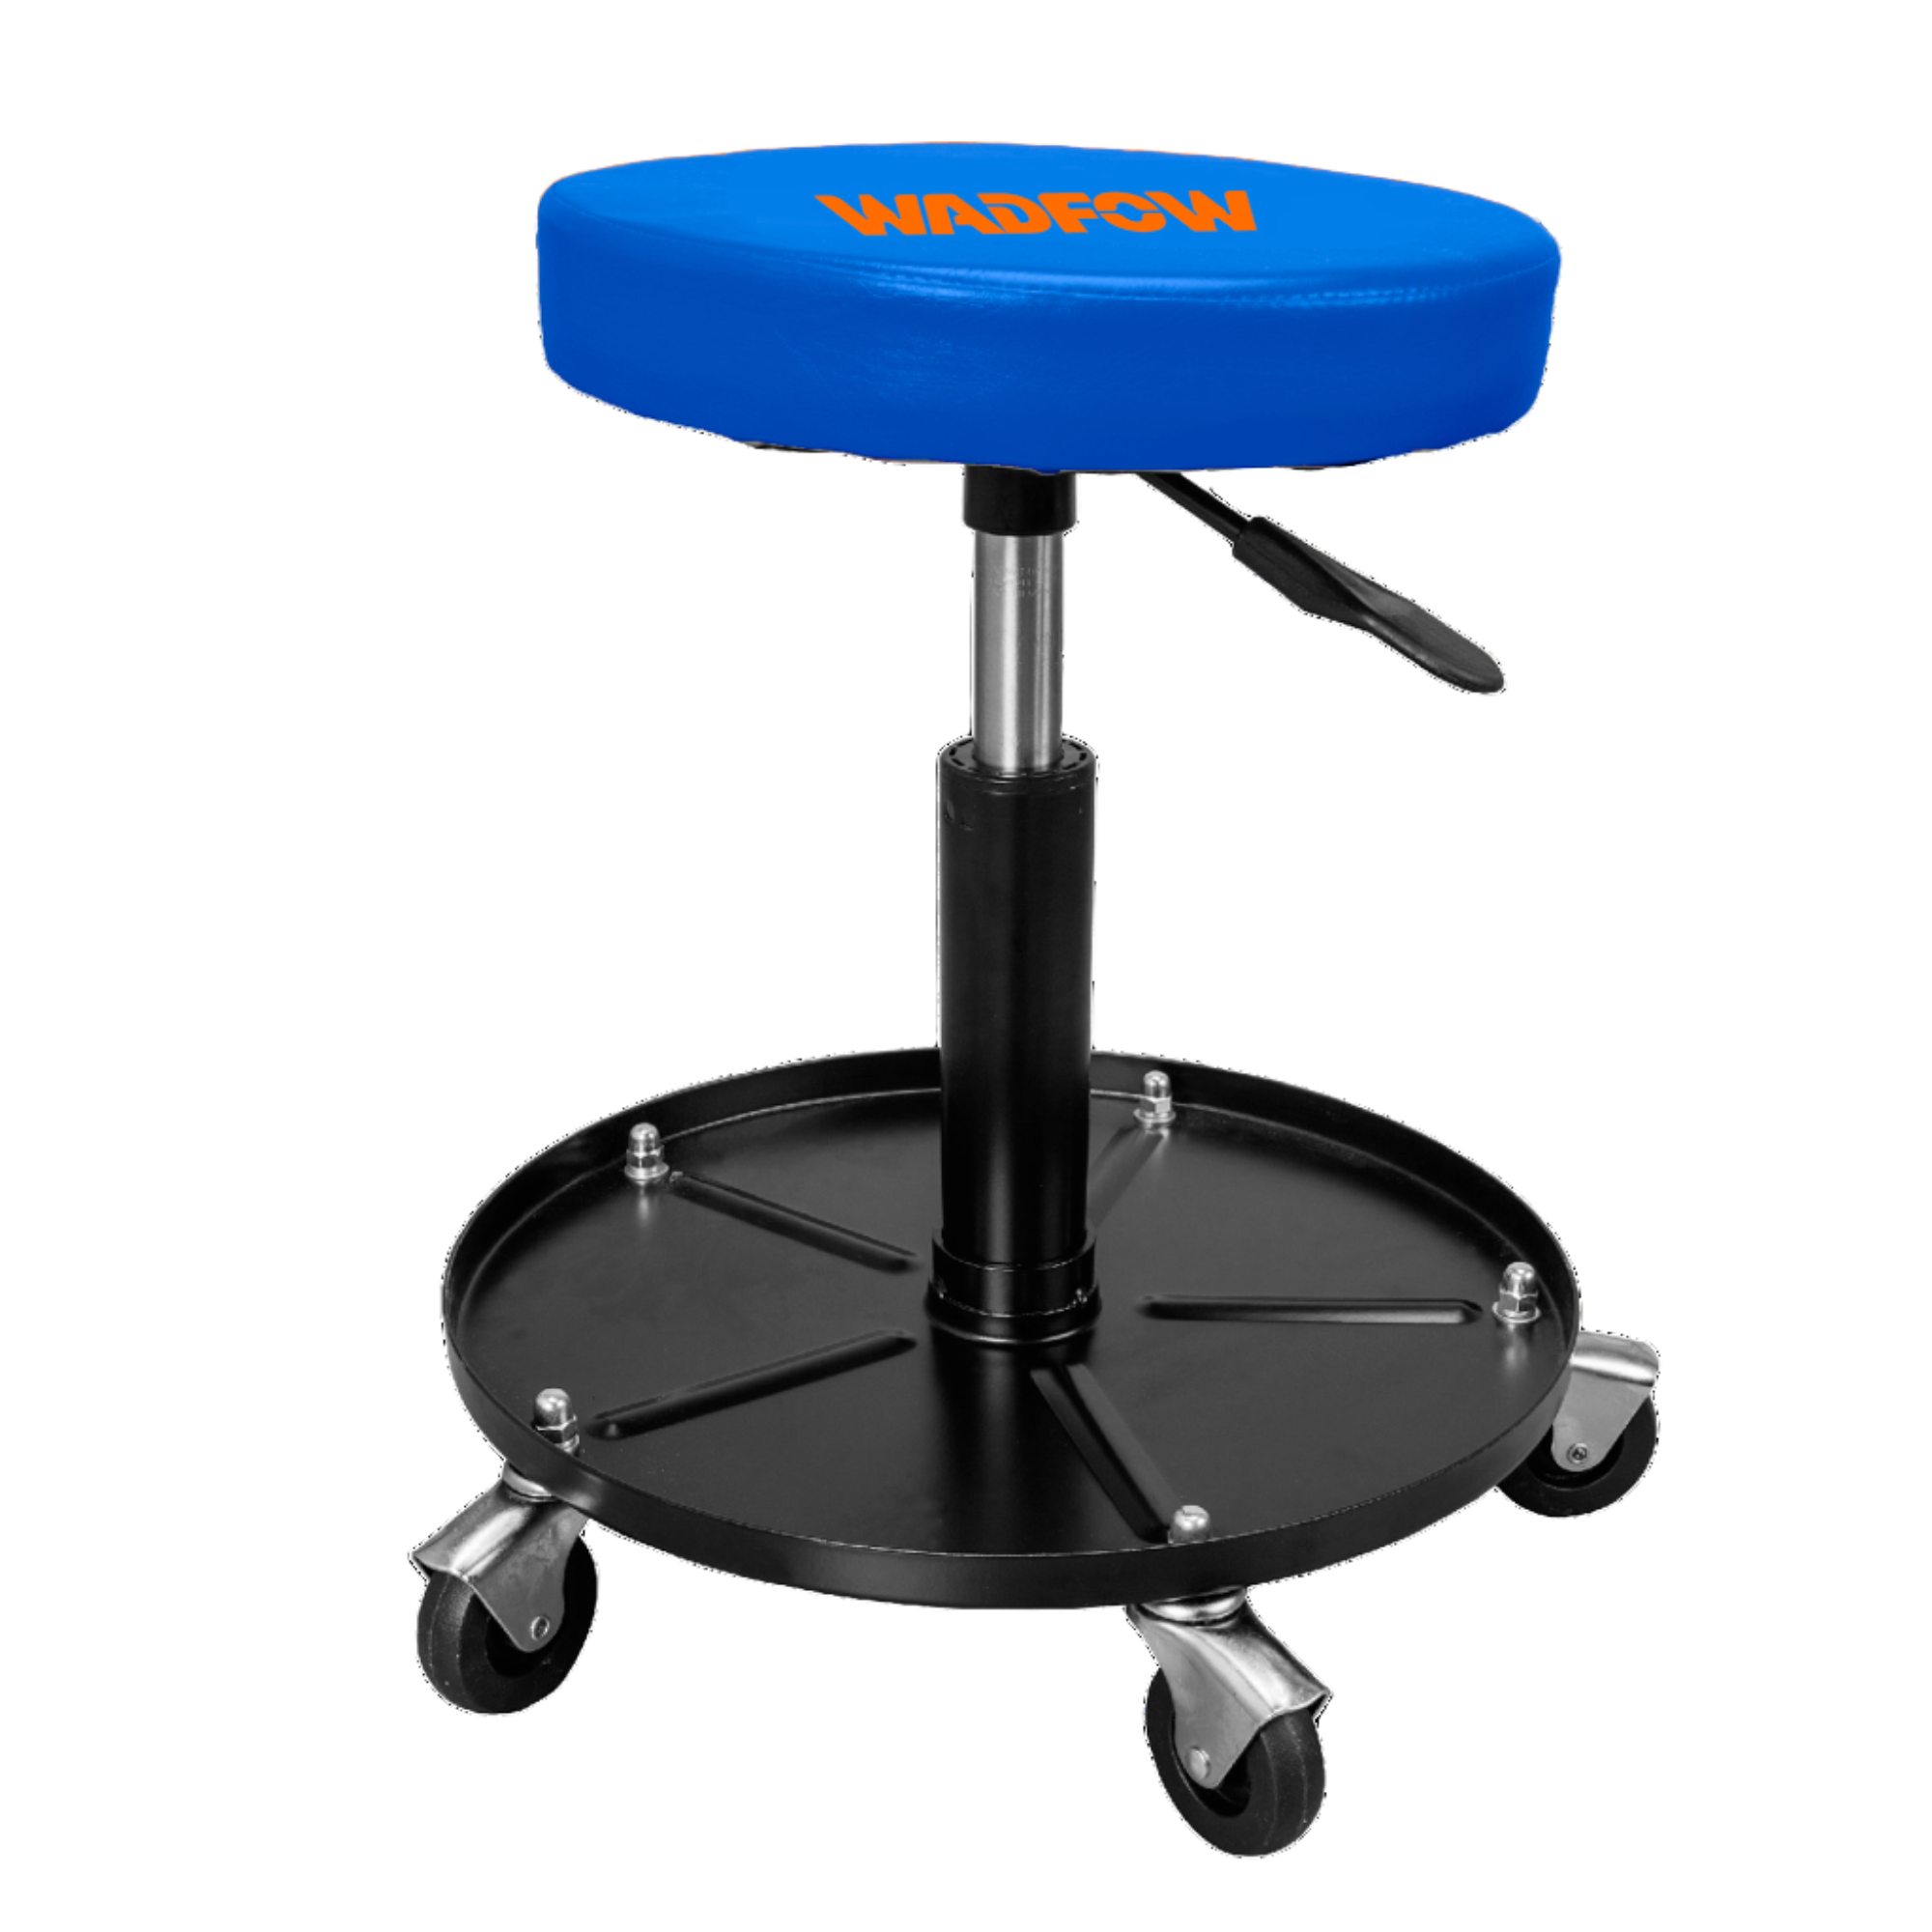 Buy Wadfow Pneumatic Lifting Creeper Seat With Four 360-Degree Swivel Casters - WNC1521 Online in Accra, Ghana | Supply Master Automotive Tools Buy Tools hardware Building materials